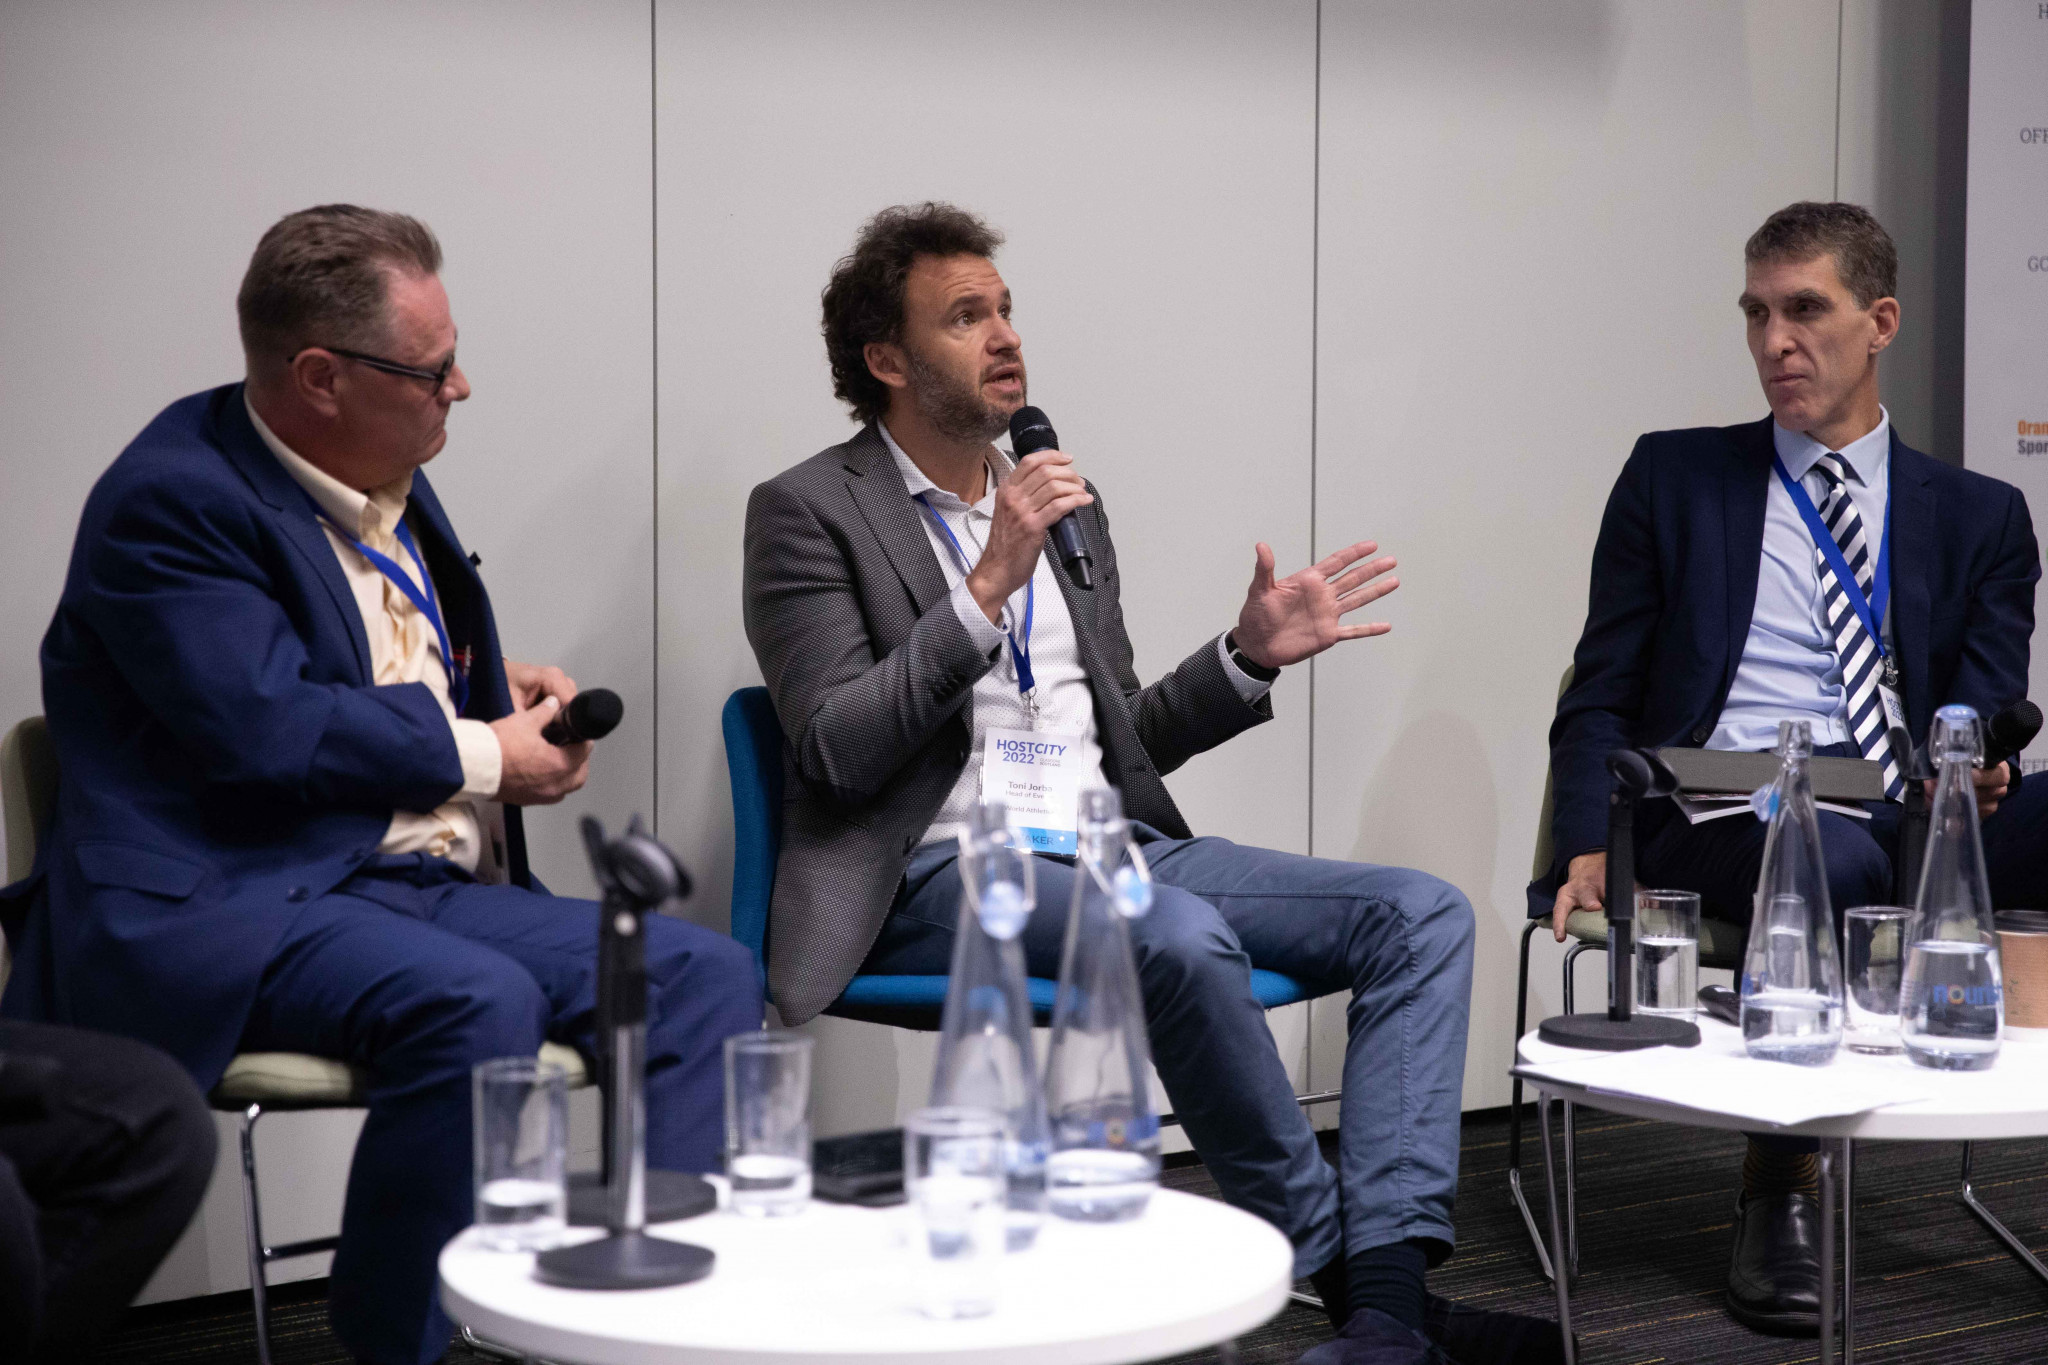 World Athletics head of event operations Toni Jorba, centre, discussed the importance of sharing the economic impact of sports events ©Rob Lindblade